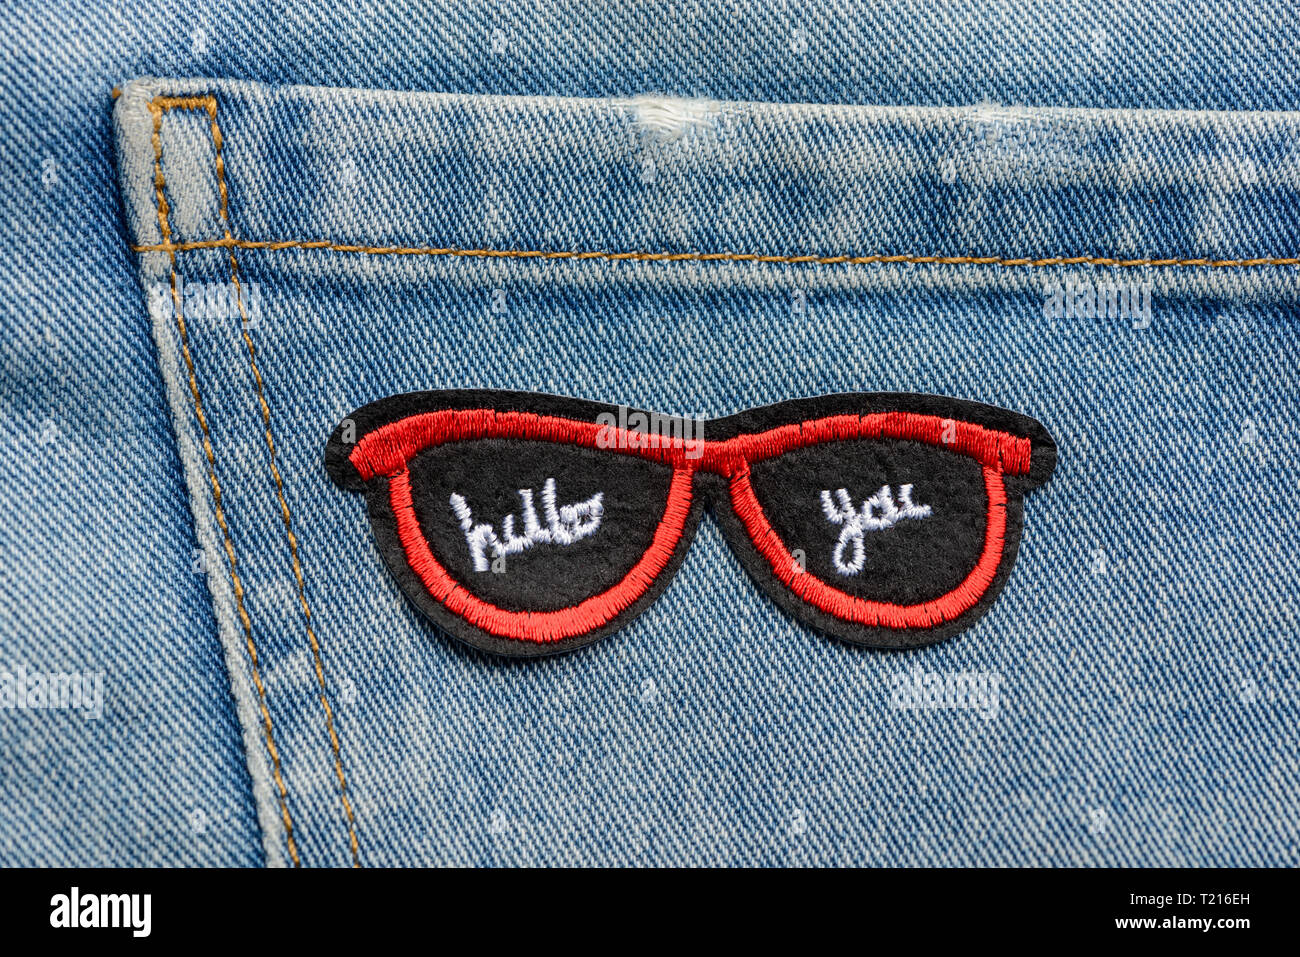 Red sunglasses embroidered patch on a pocket of jeans. Street fashion trends, stylish addition to casual denim. Stock Photo